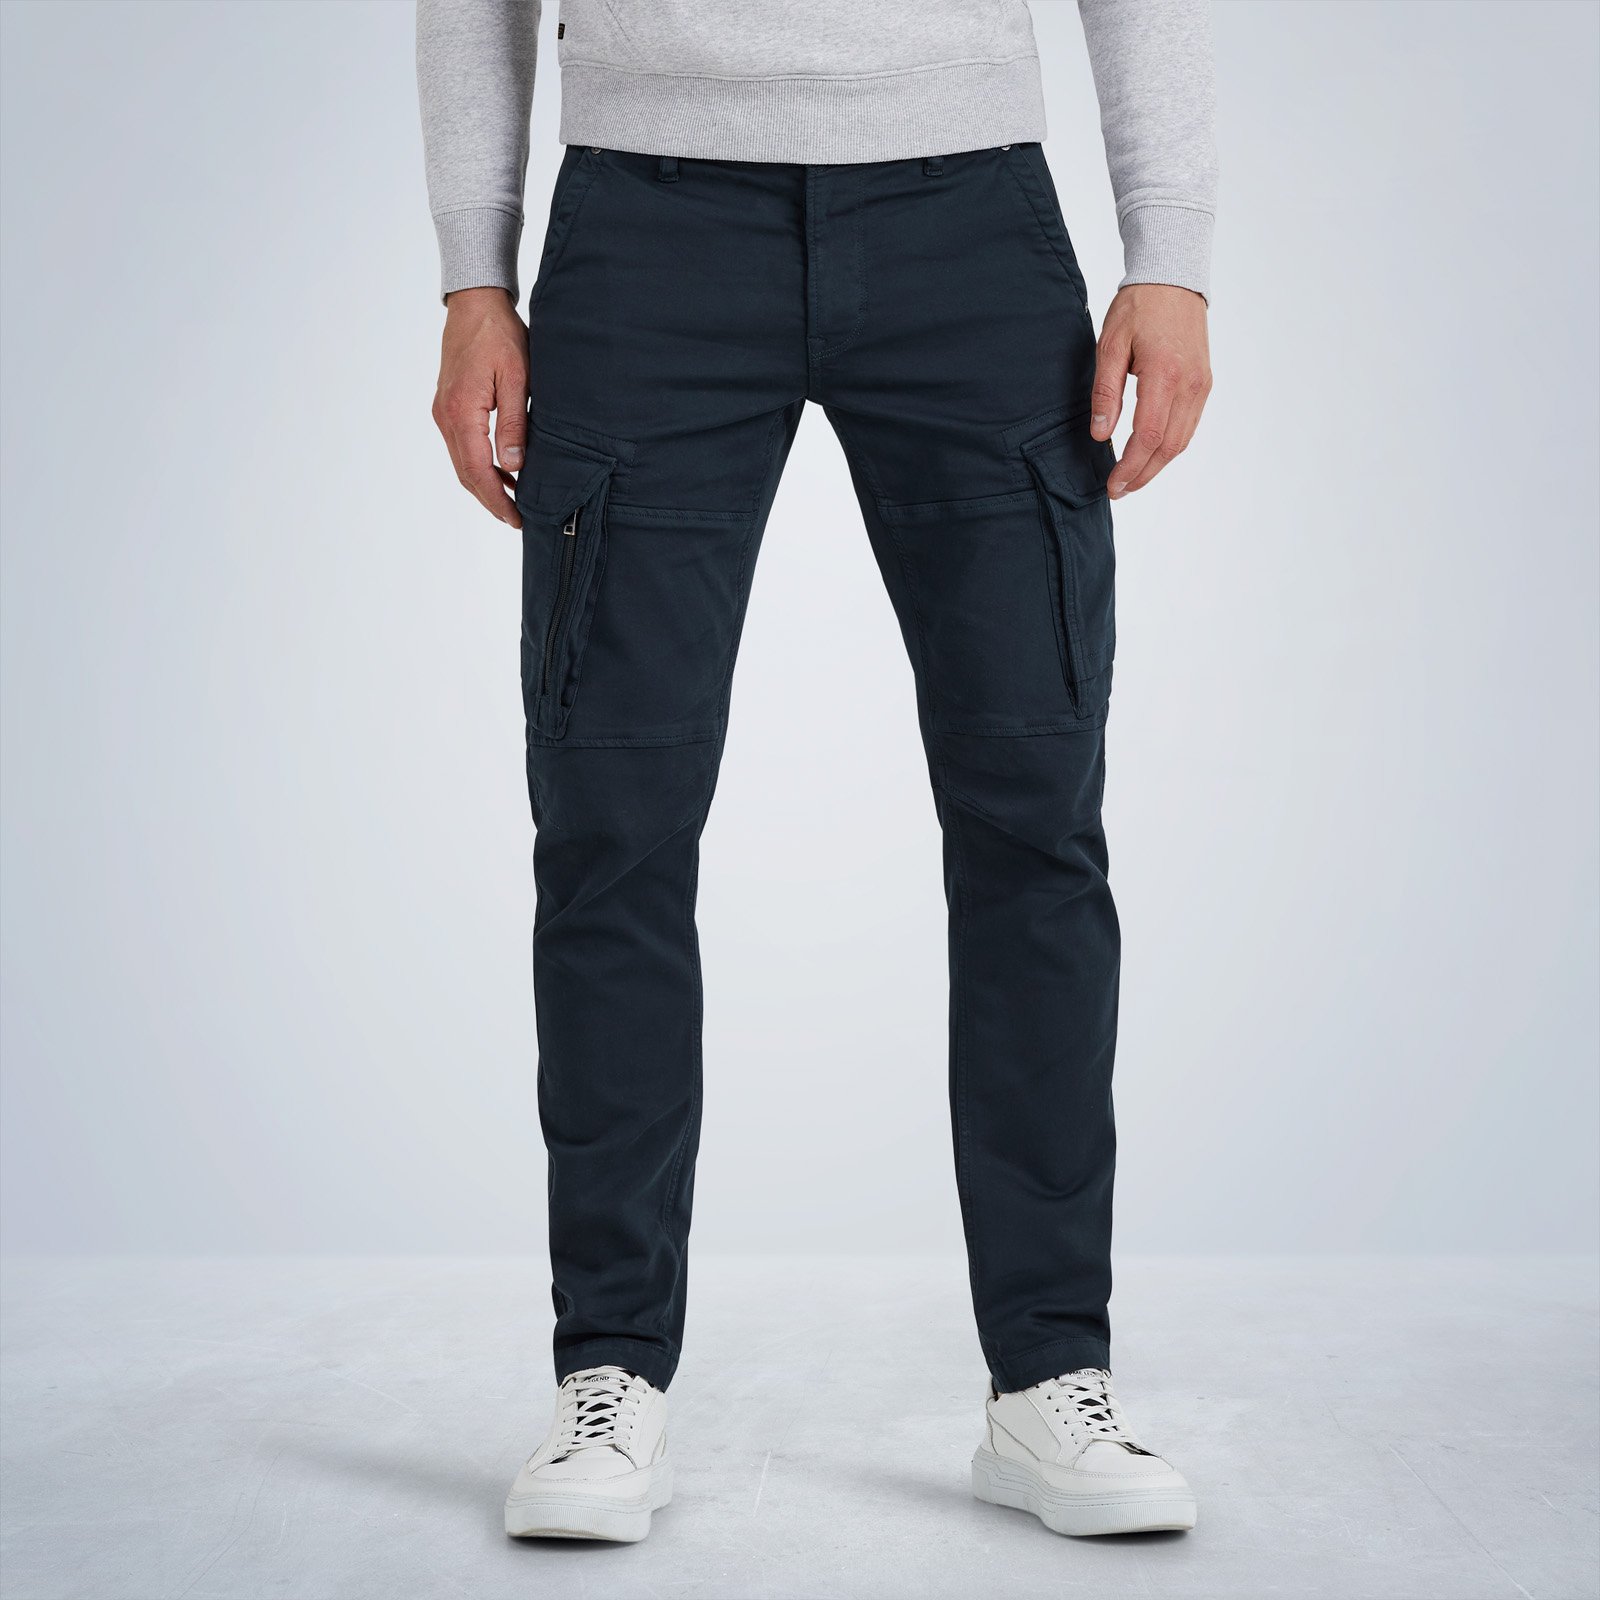 returns and relaxed | Expedizor shipping PME cargo pants | LEGEND Free fit